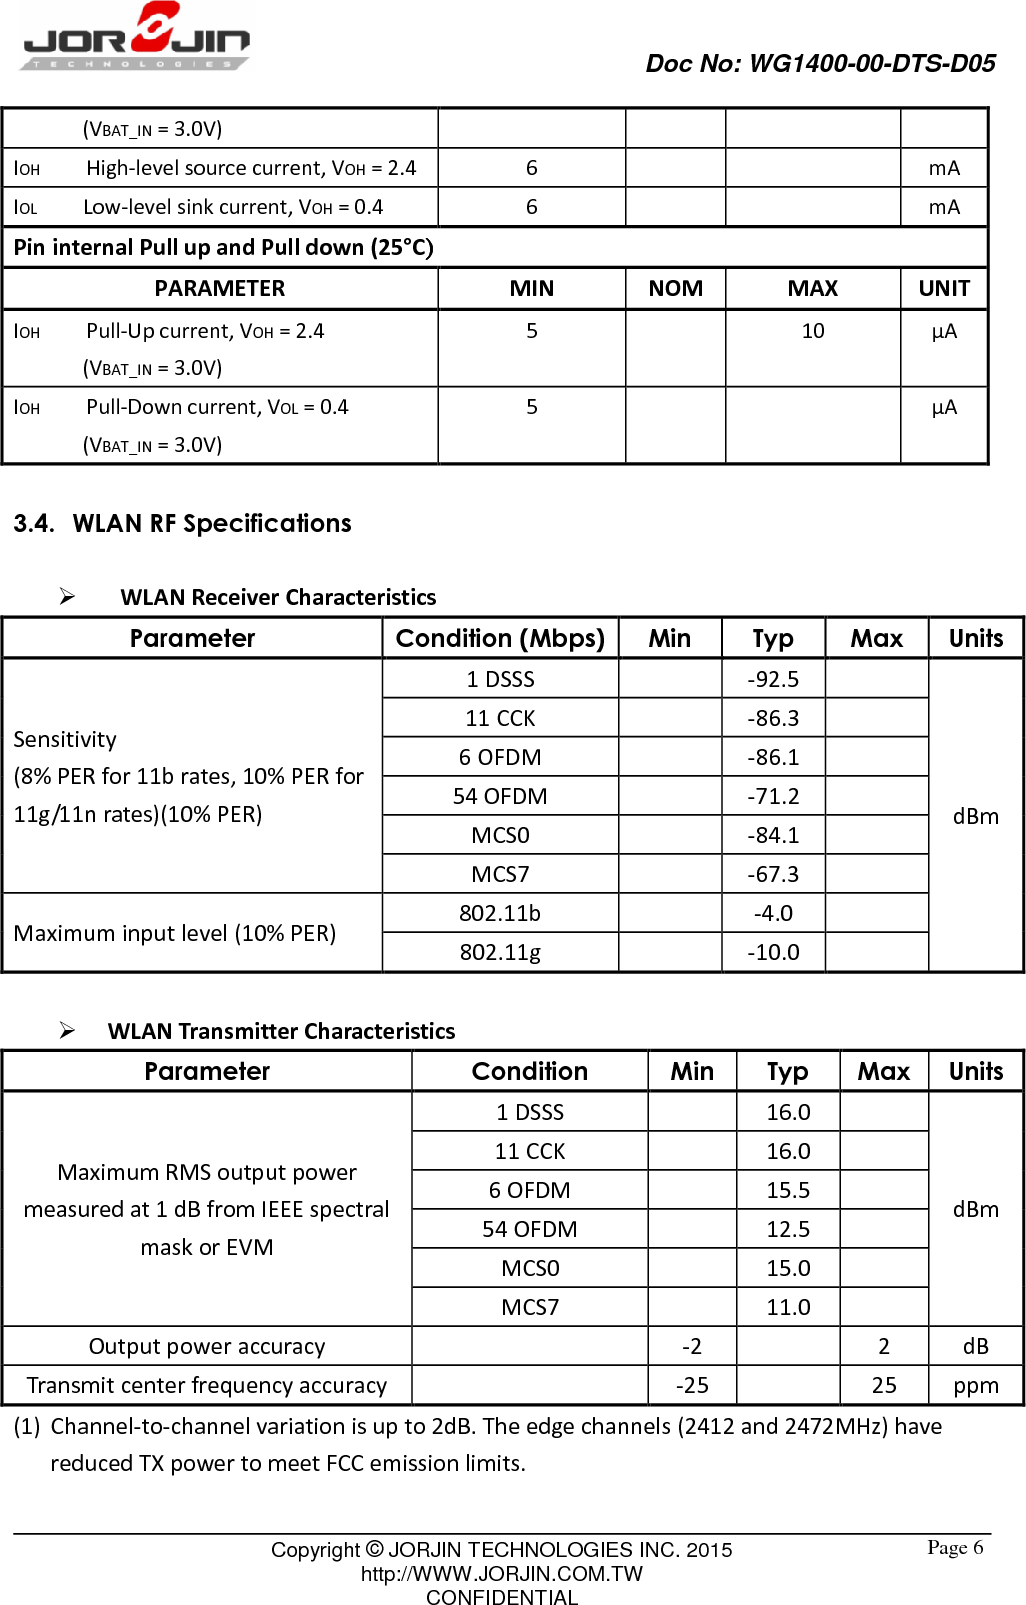                                Doc No: WG1400-00-DTS-D05                                                                                                 Copyright © JORJIN TECHNOLOGIES INC. 2015 http://WWW.JORJIN.COM.TW CONFIDENTIAL  Page 6      (VBAT_IN = 3.0V) IOH        High-level source current, VOH = 2.4  6      mA IOL        Low-level sink current, VOH = 0.4  6      mA Pin internal Pull up and Pull down (25°C)))) PARAMETER  MIN  NOM  MAX  UNIT IOH        Pull-Up current, VOH = 2.4       (VBAT_IN = 3.0V) 5    10  μA IOH        Pull-Down current, VOL = 0.4       (VBAT_IN = 3.0V) 5      μA 3.4.  WLAN RF Specifications   WLAN Receiver Characteristics        Parameter  Condition (Mbps) Min  Typ  Max  Units Sensitivity (8% PER for 11b rates, 10% PER for 11g/11n rates)(10% PER) 1 DSSS    -92.5   dBm 11 CCK    -86.3   6 OFDM    -86.1   54 OFDM    -71.2   MCS0    -84.1   MCS7    -67.3   Maximum input level (10% PER)  802.11b    -4.0   802.11g    -10.0     WLAN Transmitter Characteristics Parameter  Condition  Min  Typ  Max Units Maximum RMS output power measured at 1 dB from IEEE spectral mask or EVM 1 DSSS    16.0   dBm 11 CCK    16.0   6 OFDM    15.5   54 OFDM    12.5   MCS0    15.0   MCS7    11.0   Output power accuracy    -2    2  dB Transmit center frequency accuracy    -25    25  ppm (1) Channel-to-channel variation is up to 2dB. The edge channels (2412 and 2472MHz) have reduced TX power to meet FCC emission limits.   